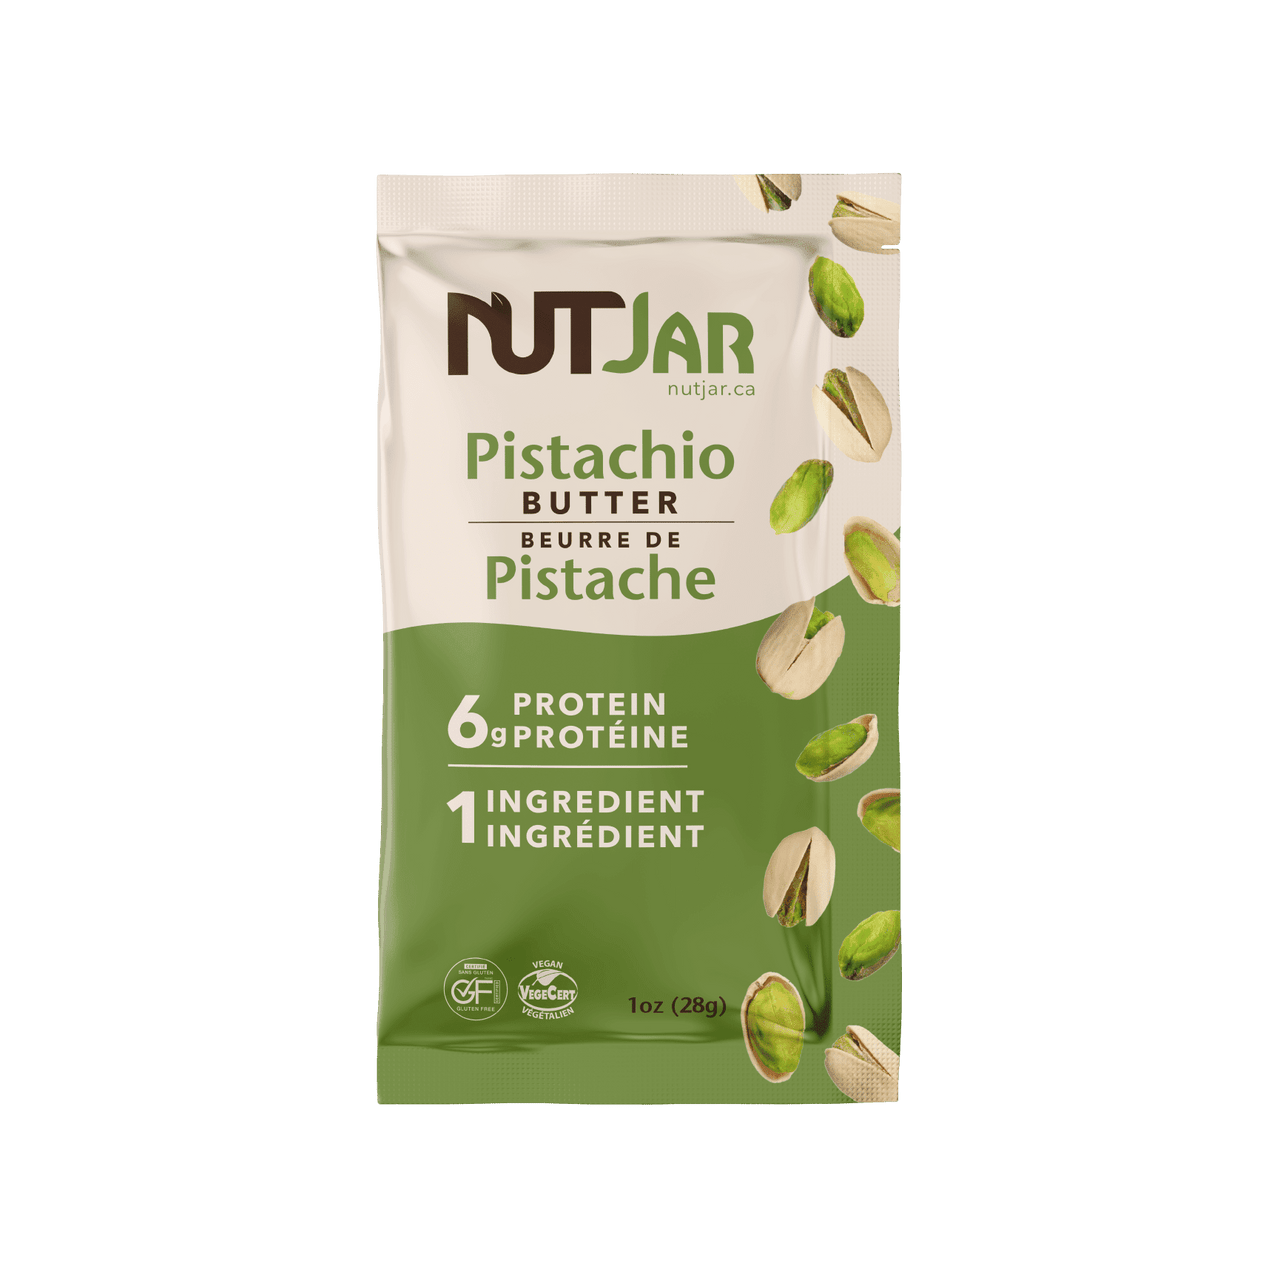 Pistachio Butter Protein Packs